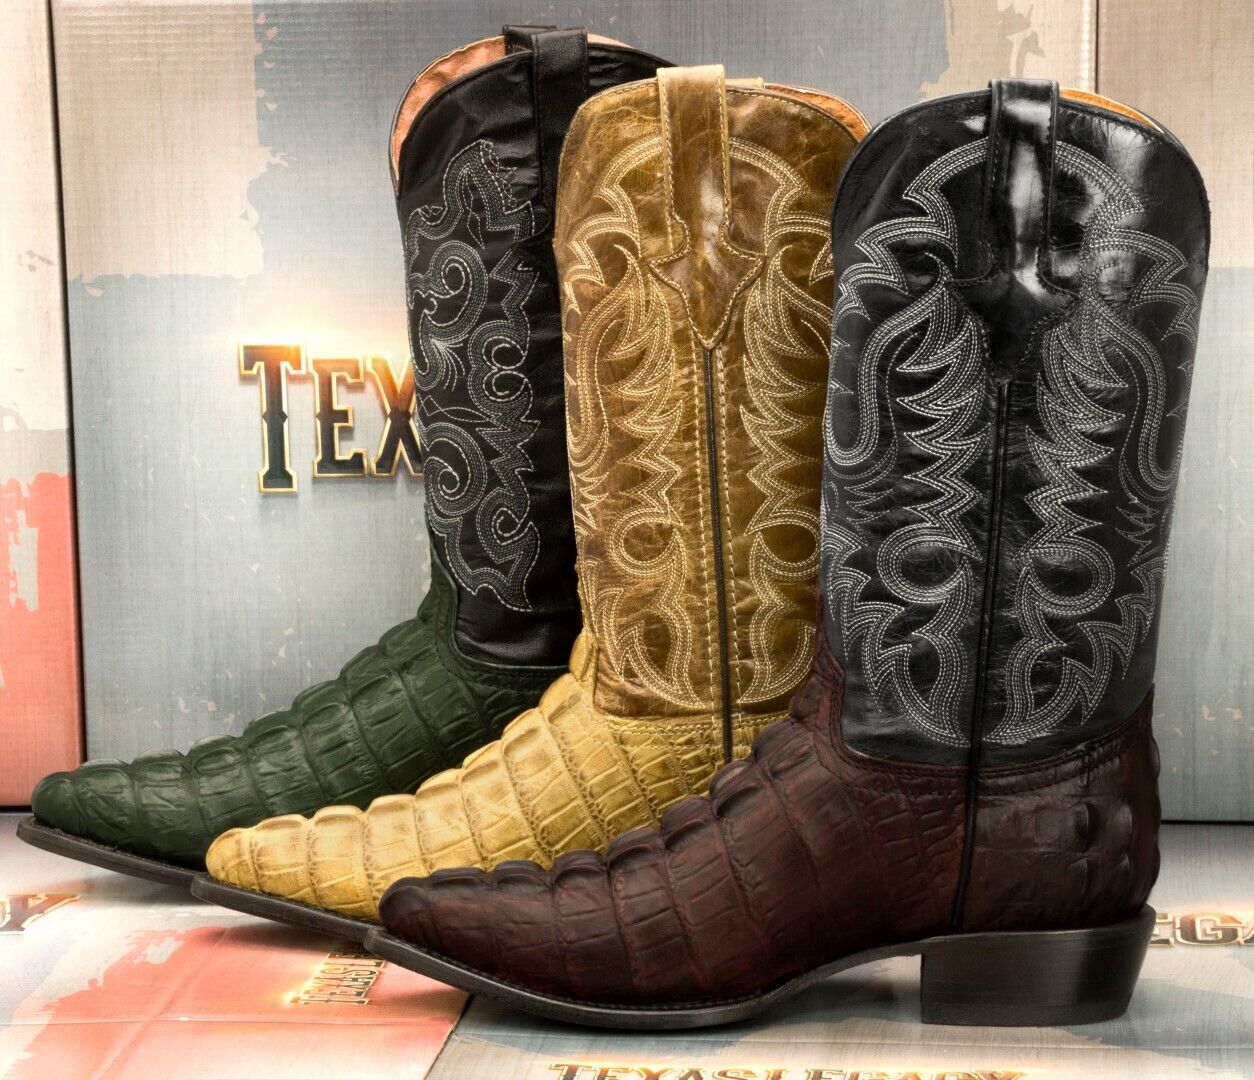 TEAM WEST MENS COWBOY BOOTS Exotic Animal Print GENUINE LEATHER Cowboy Boots 3 COLORS 6-14